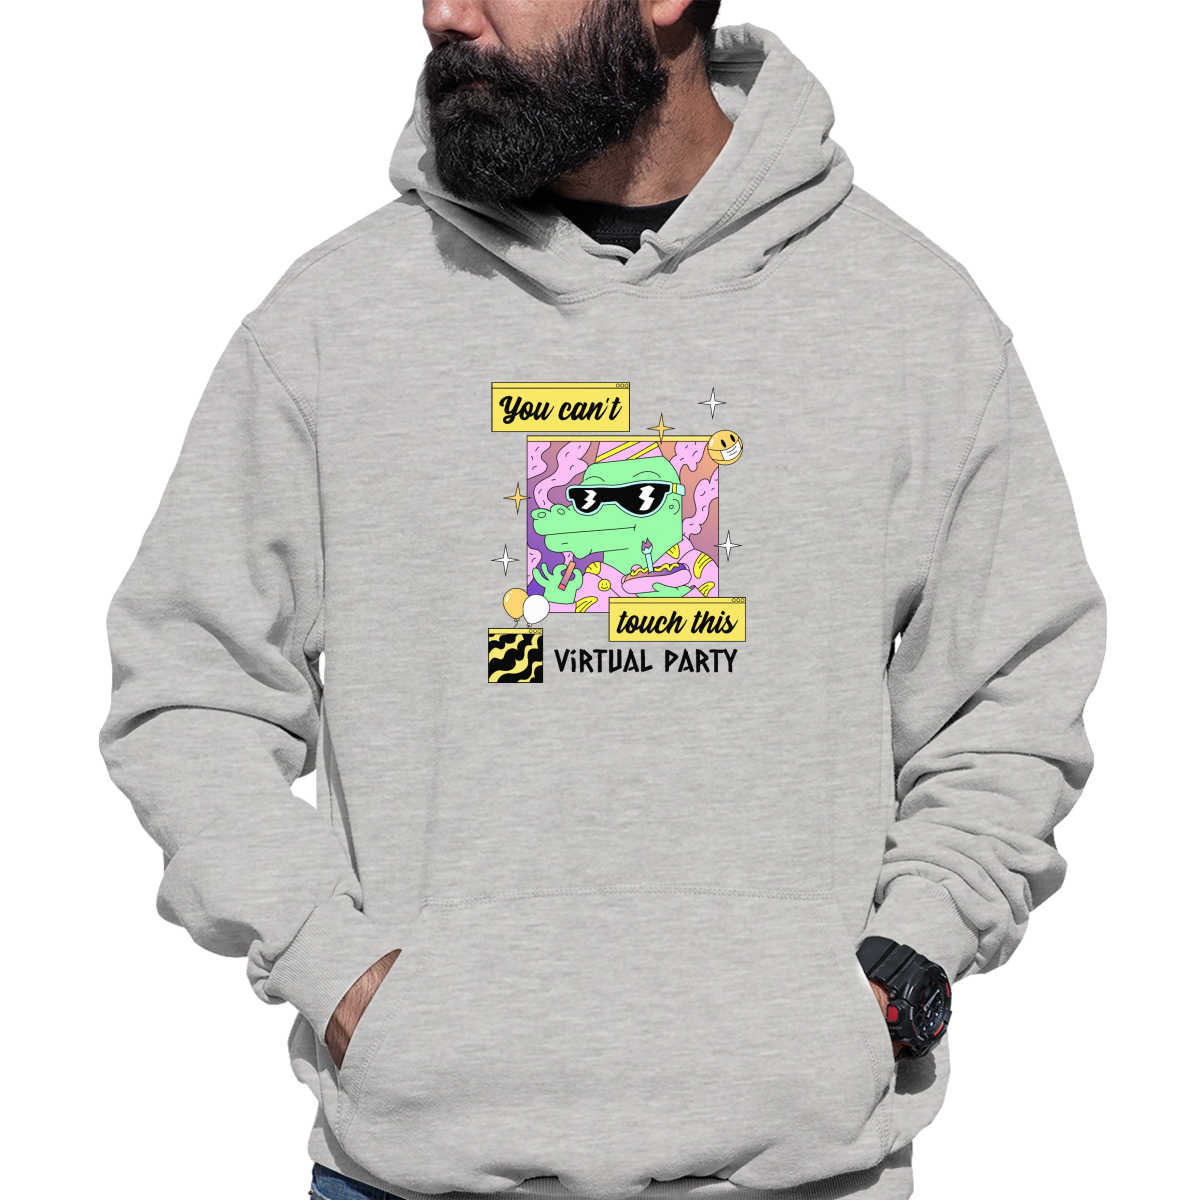 You Can't Touch This Unisex Hoodie | Gray